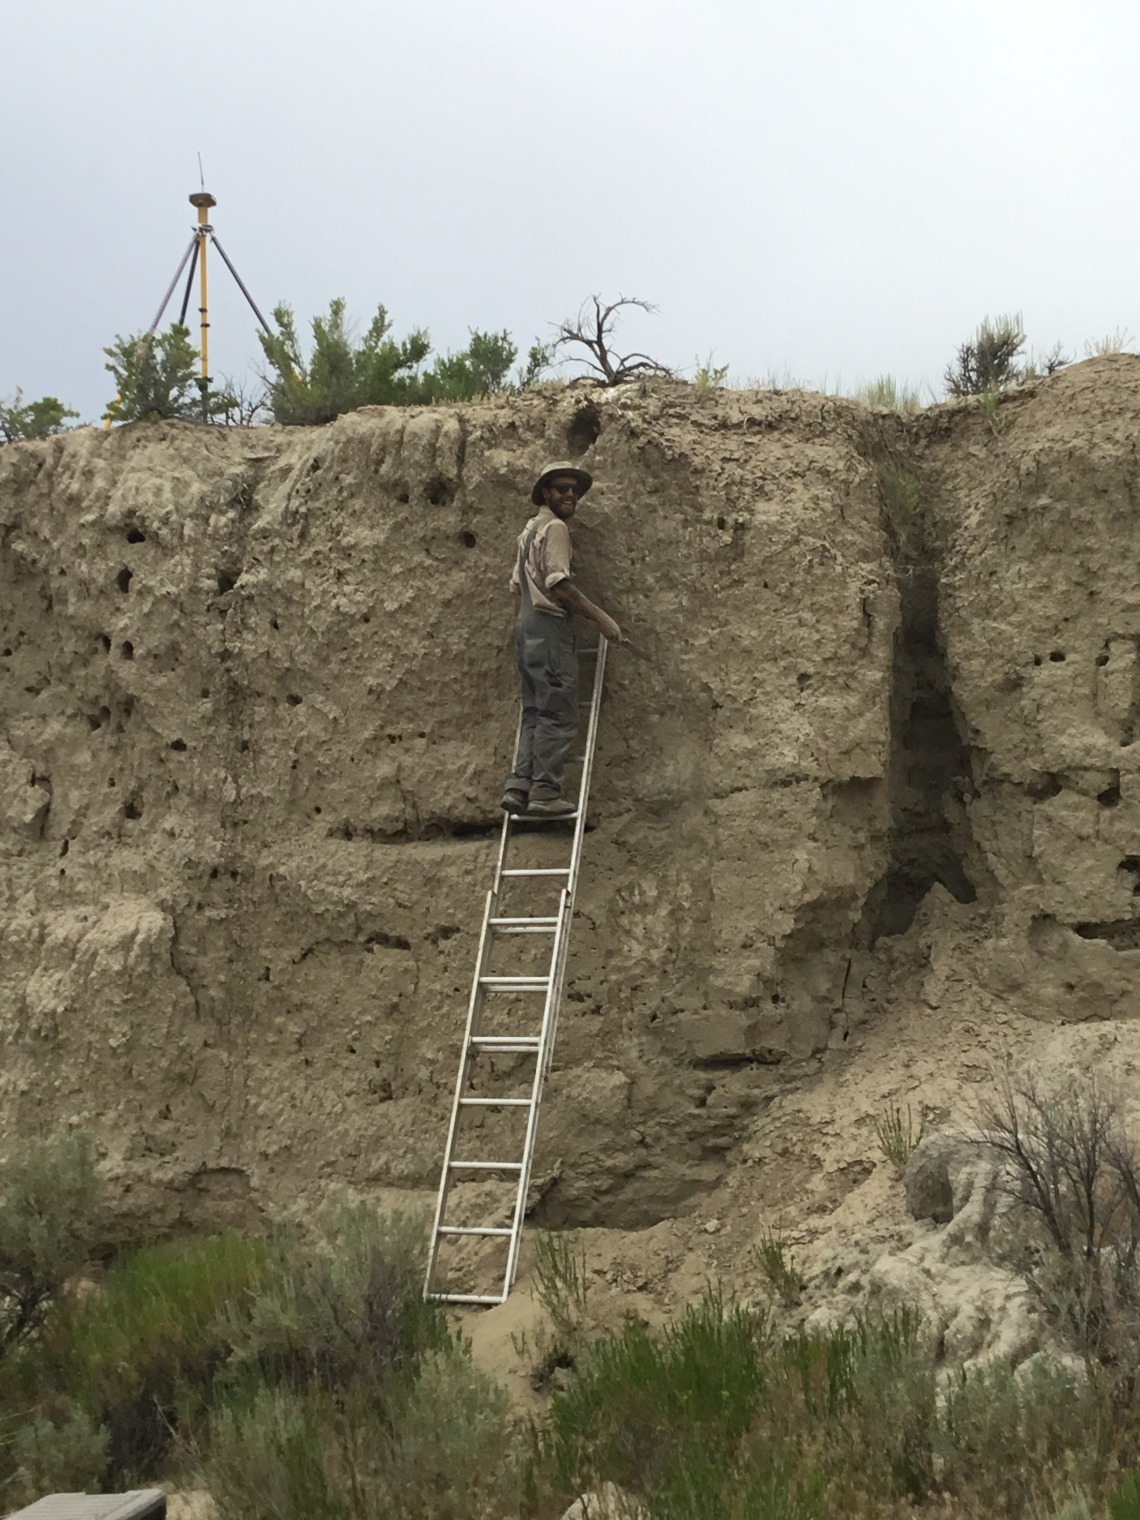 John Kemper standing on a ladder leaning on a cliffside looking back with a smile.